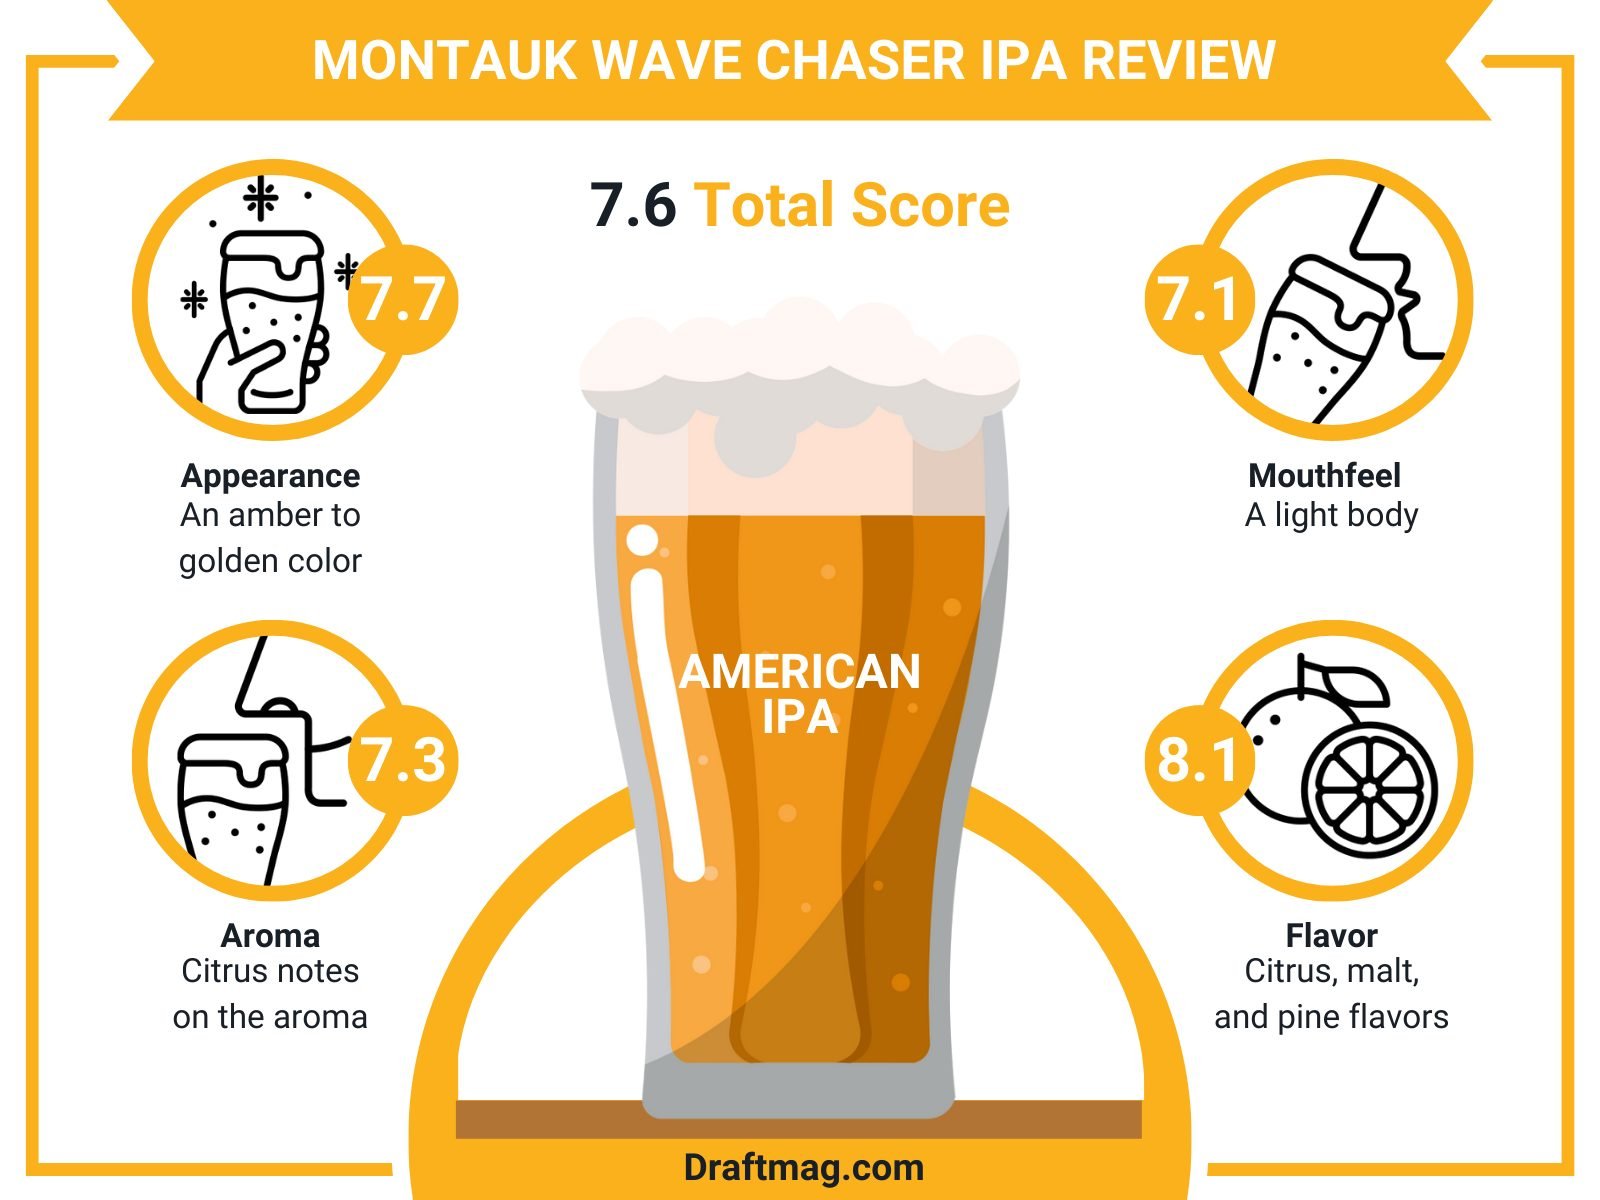 Montauk Wave Chaser Review Infographic